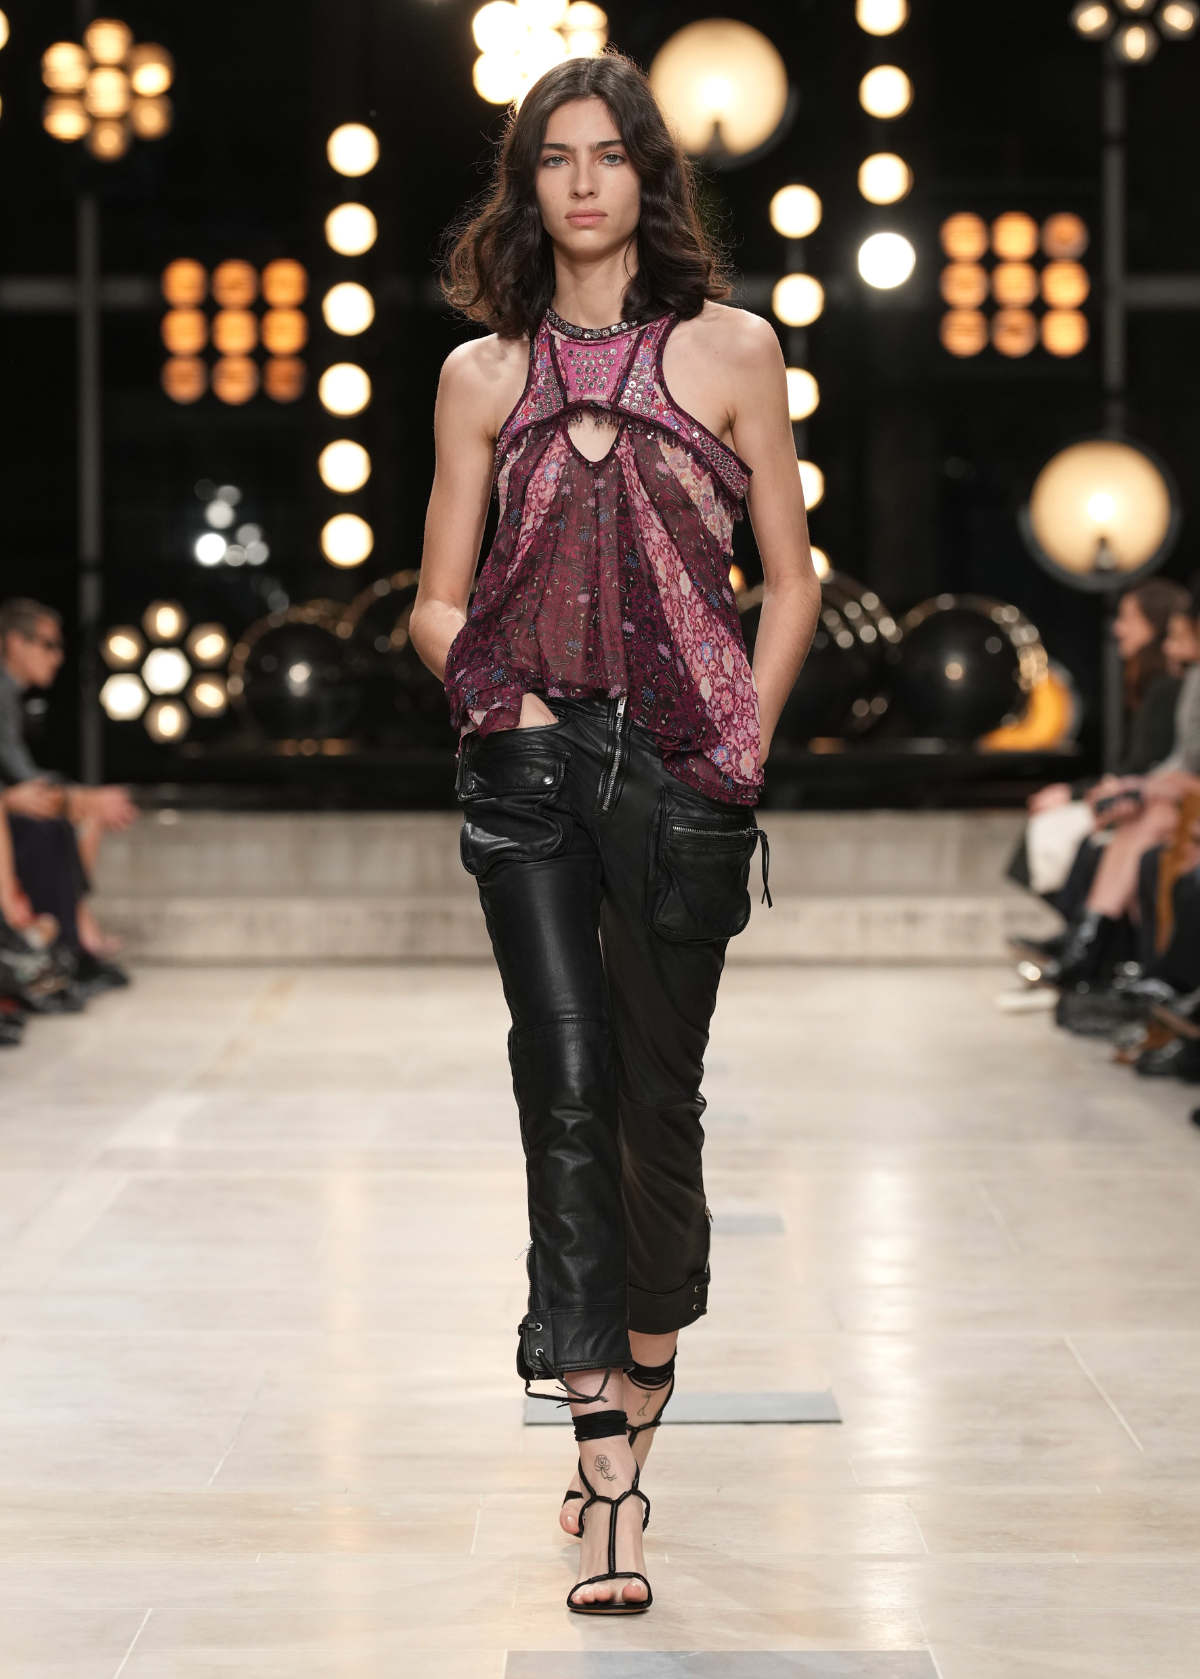 Isabel Marant Presents Its New Spring-Summer 2023 Collection